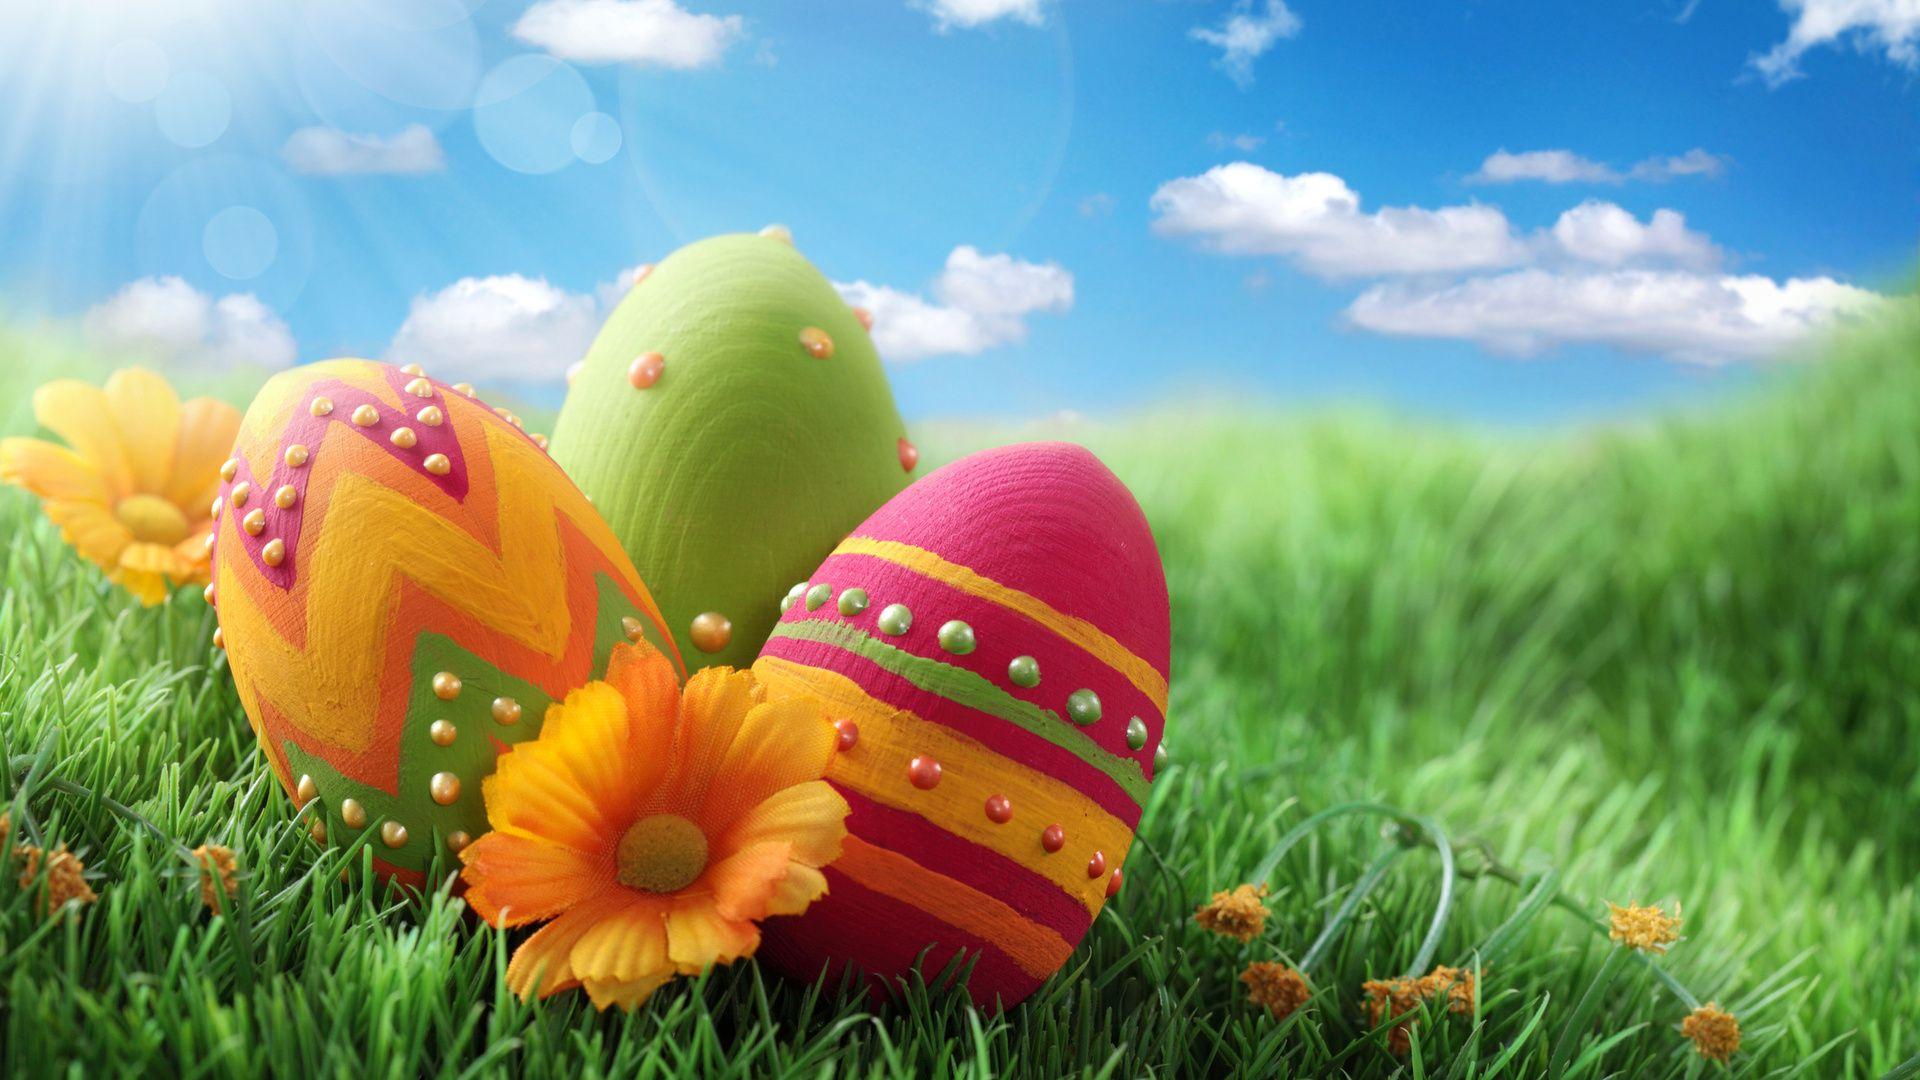 The painted eggs HD wallpapers free download | Wallpaperbetter